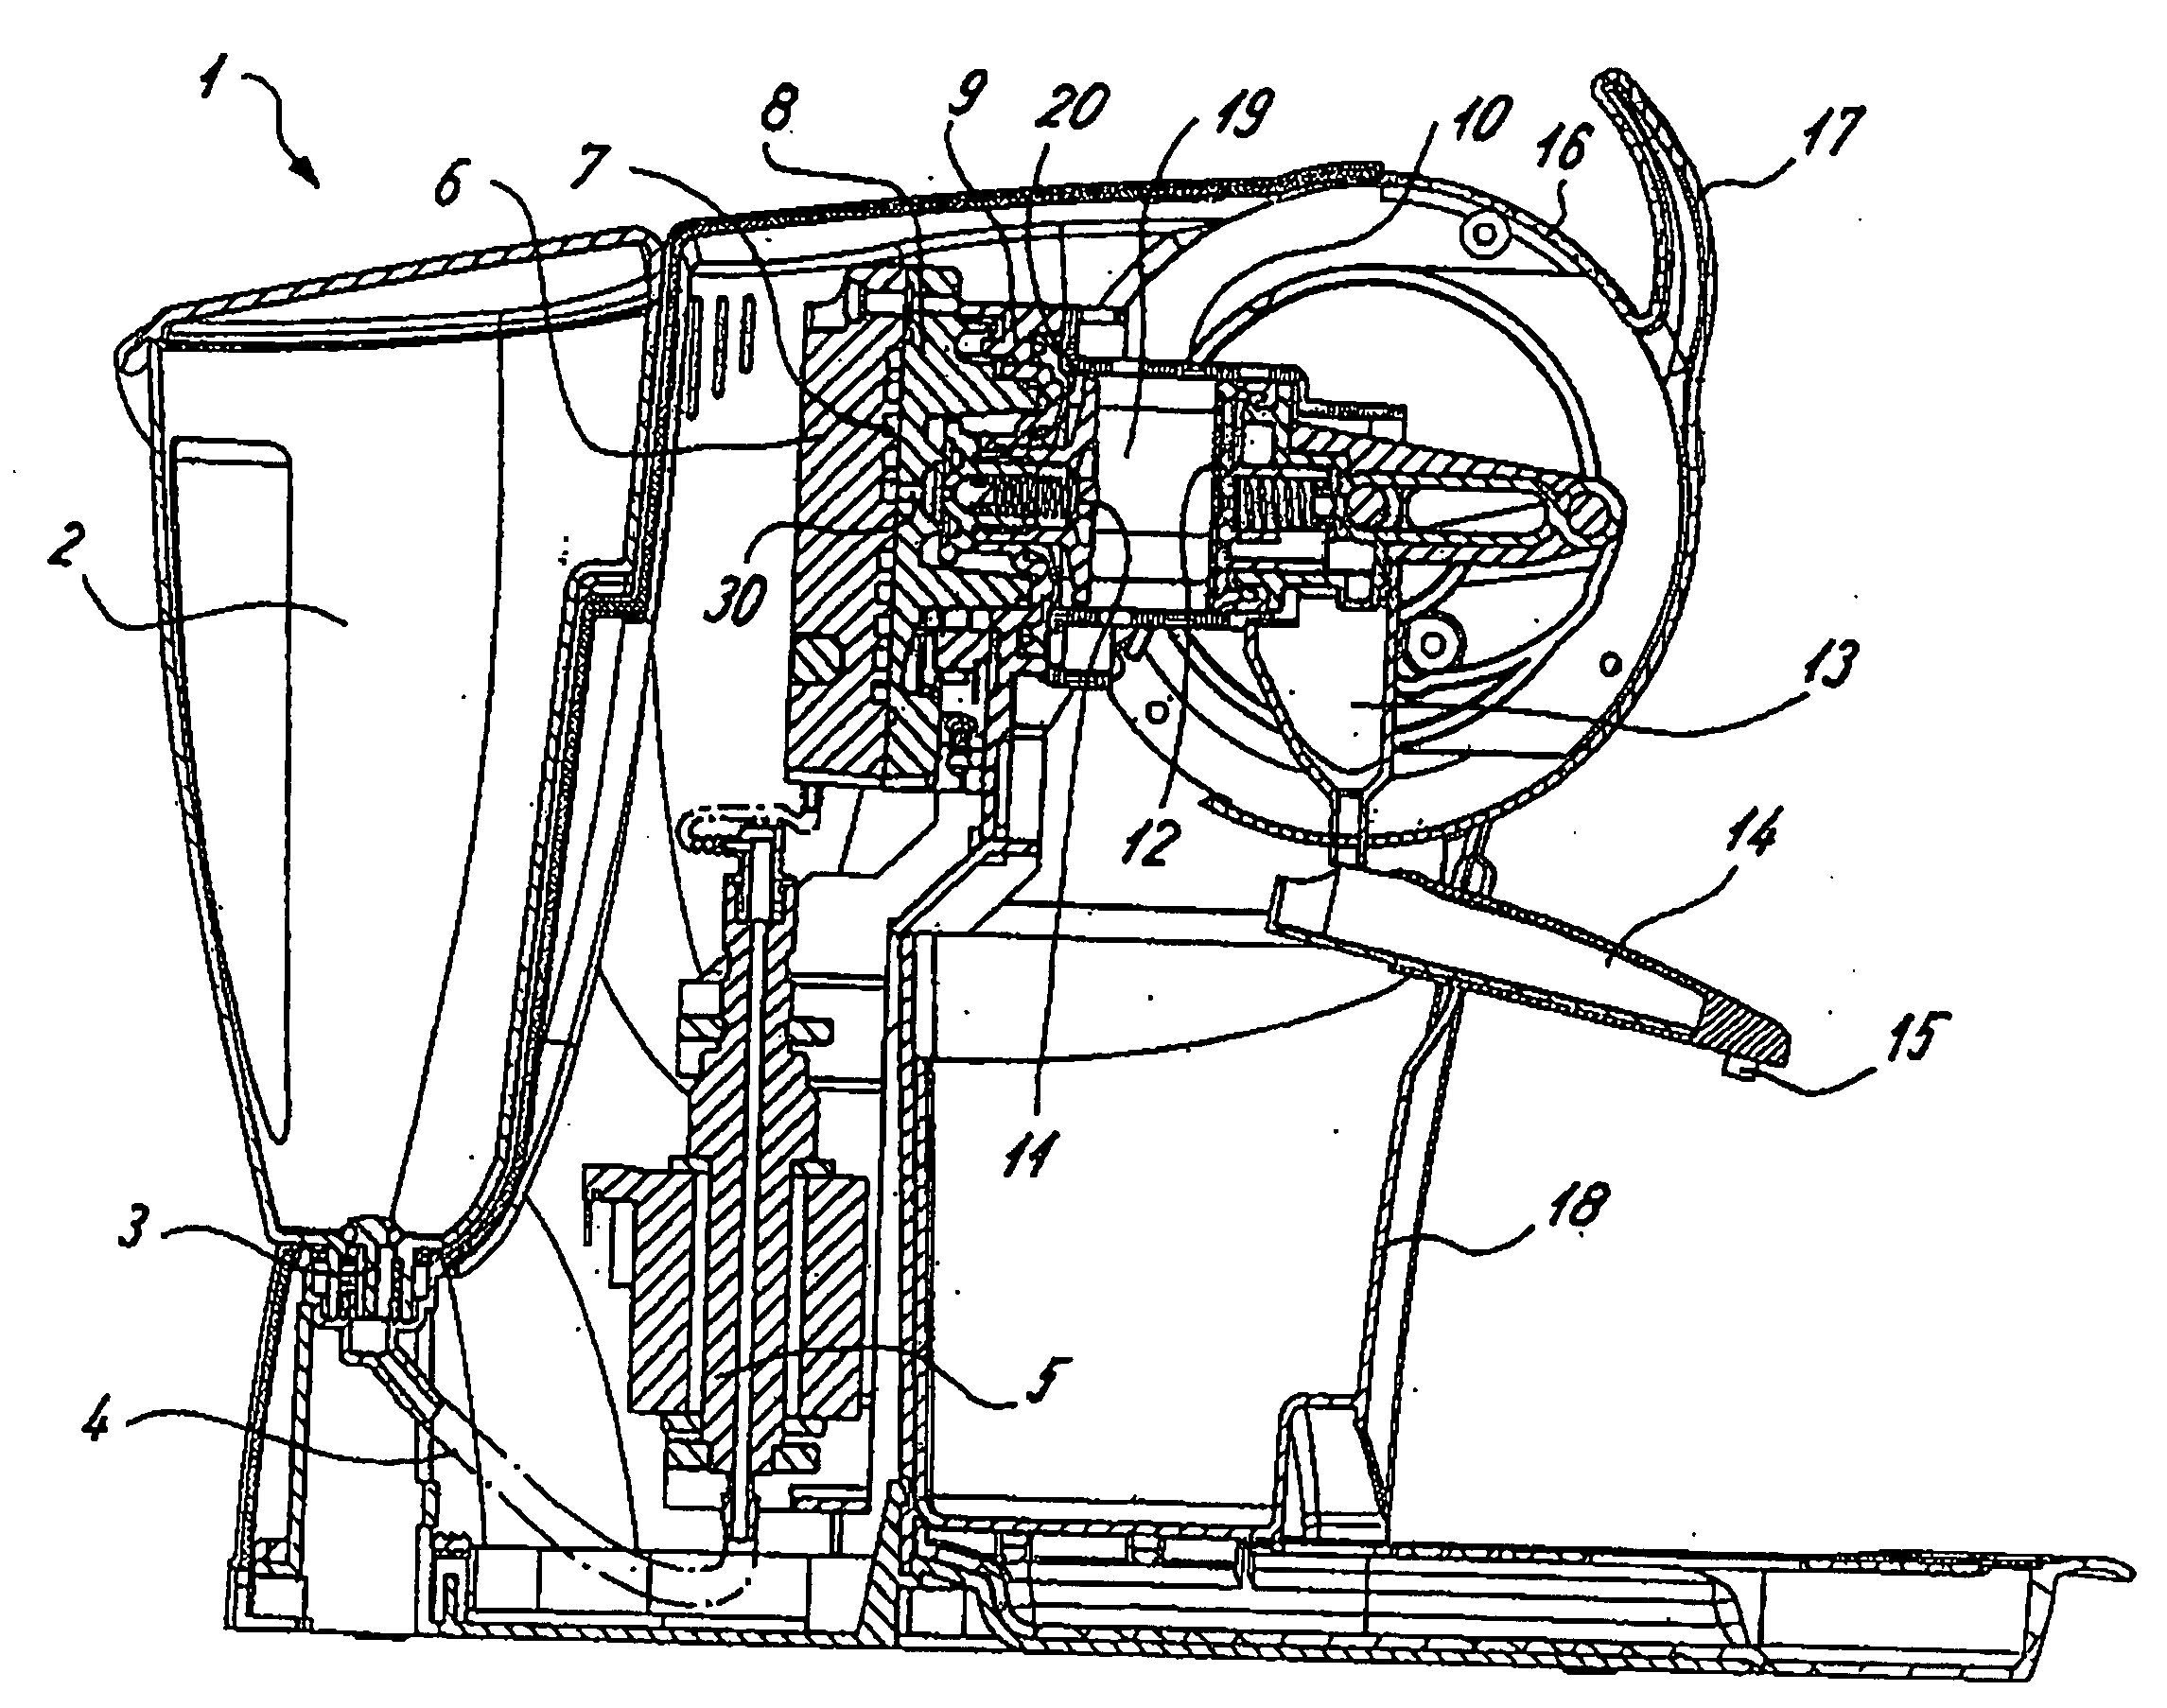 Brewing apparatus for a coffee machine